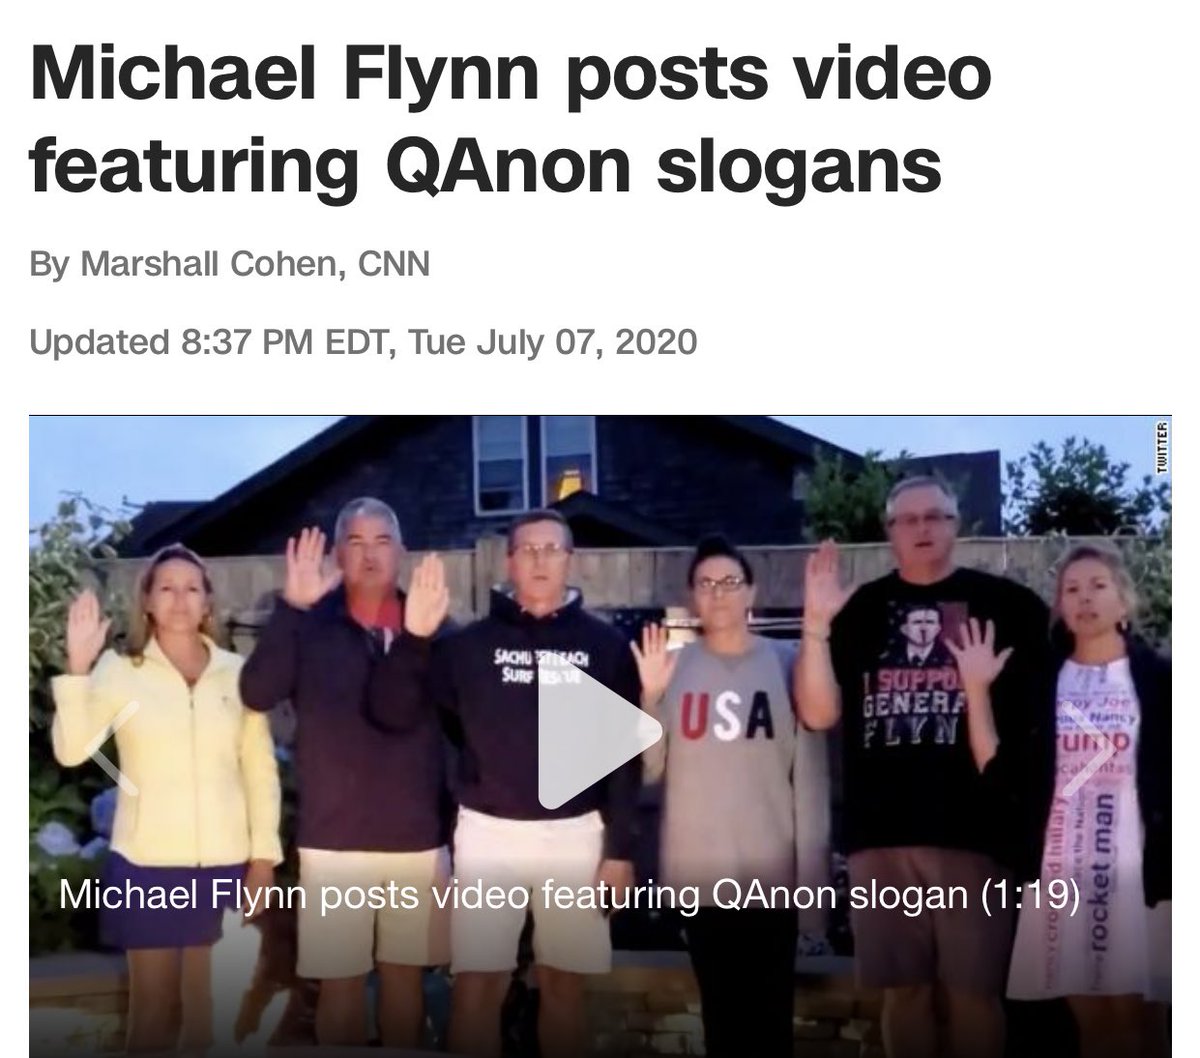 General Charles Flynn had to KNOW his siblings and other relatives were planning the Capitol insurrection. It’s all over the Internet. Why didn’t he tell his brother to stand down or face being chargedHe knows Qanon is a domestic terror threat...